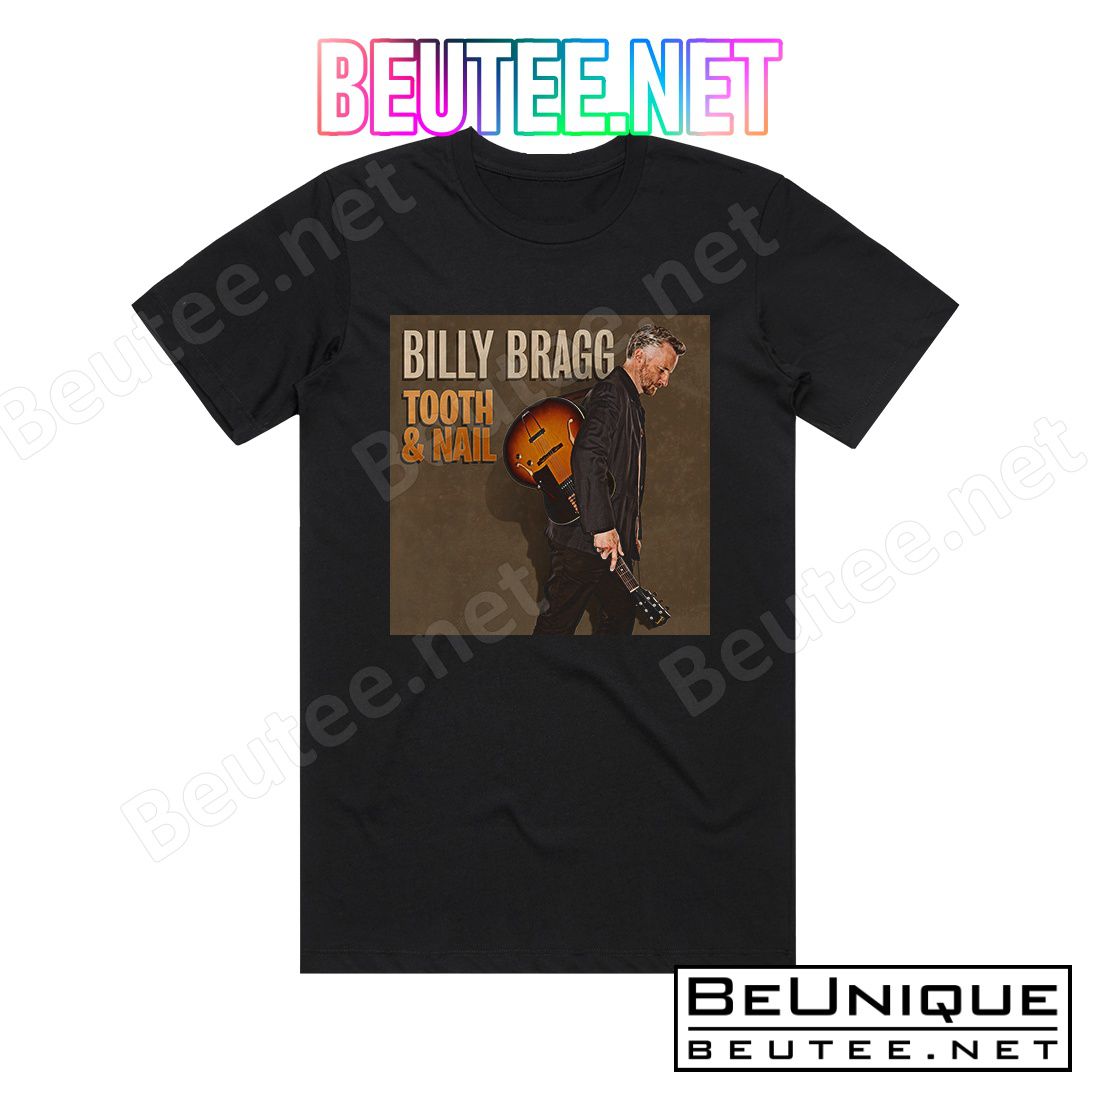 Billy Bragg Tooth Nail Album Cover T-Shirt